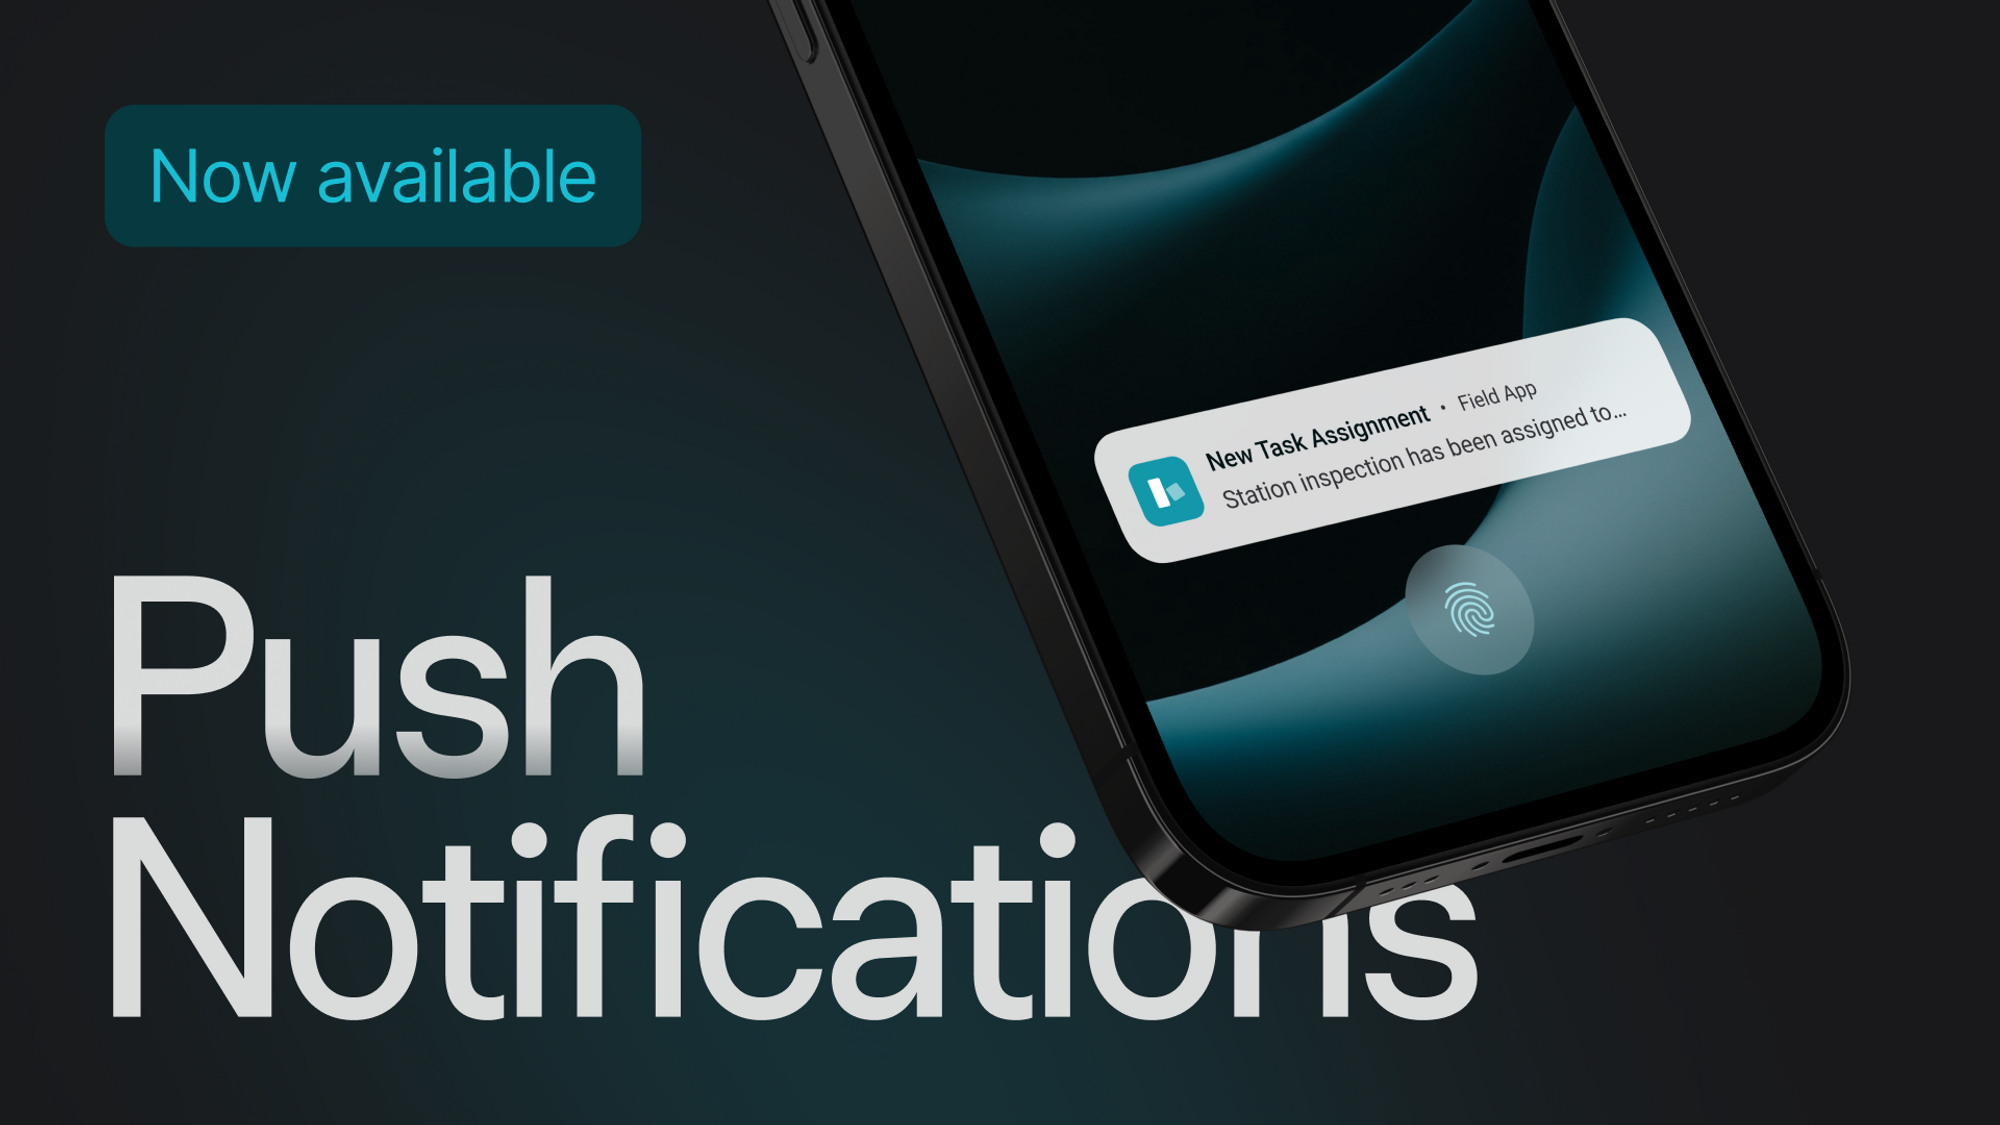 What is a push notification?